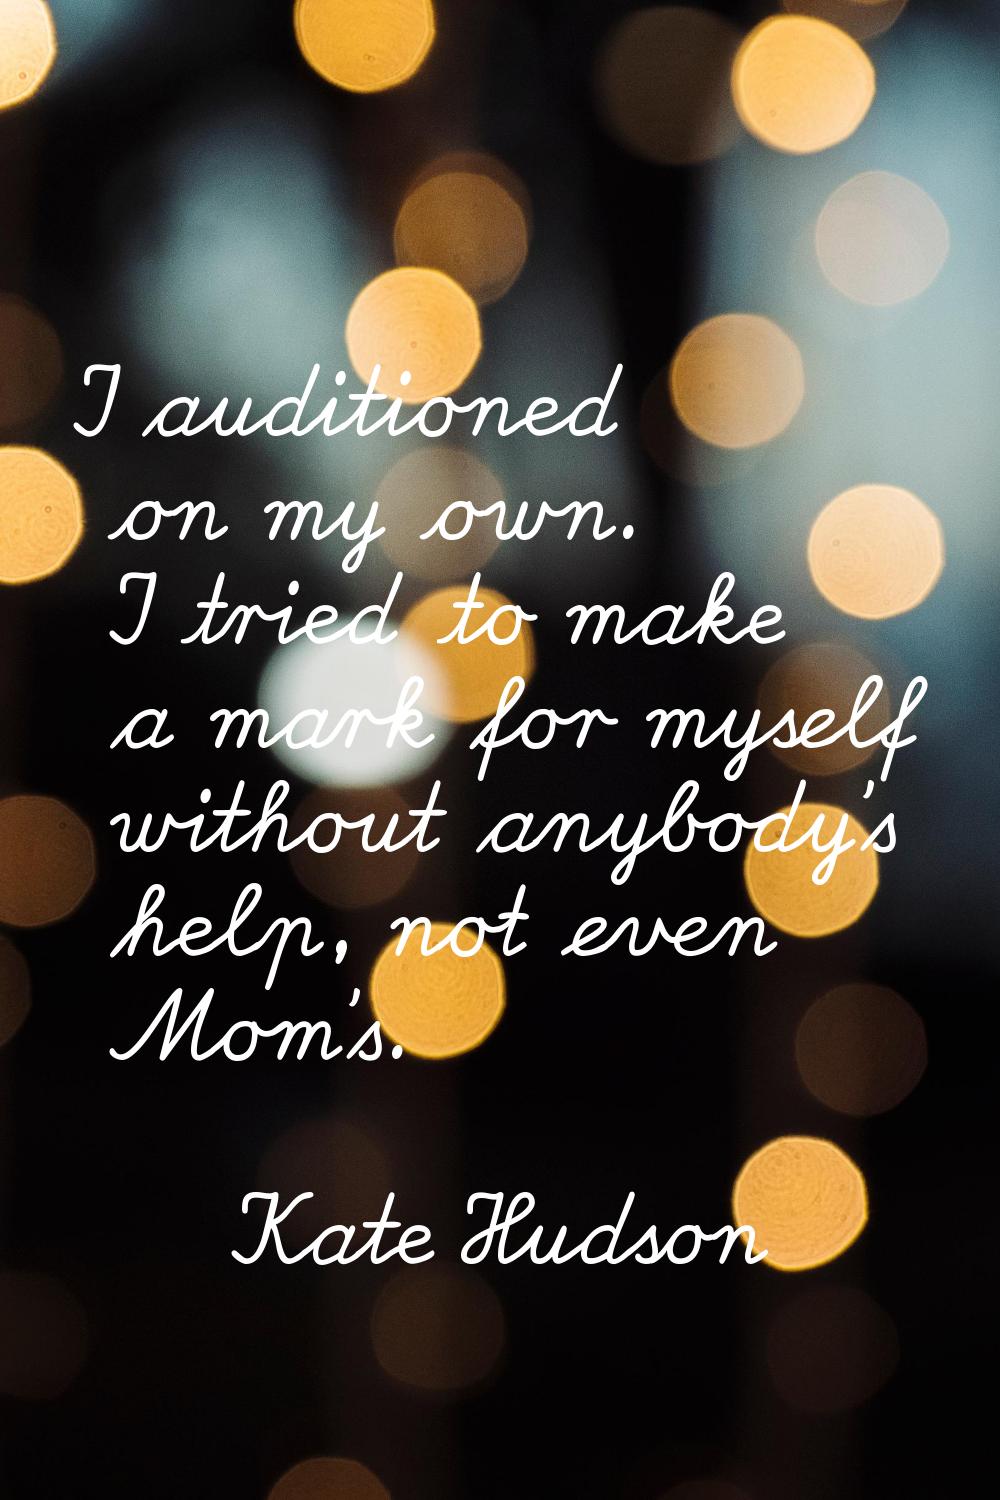 I auditioned on my own. I tried to make a mark for myself without anybody's help, not even Mom's.